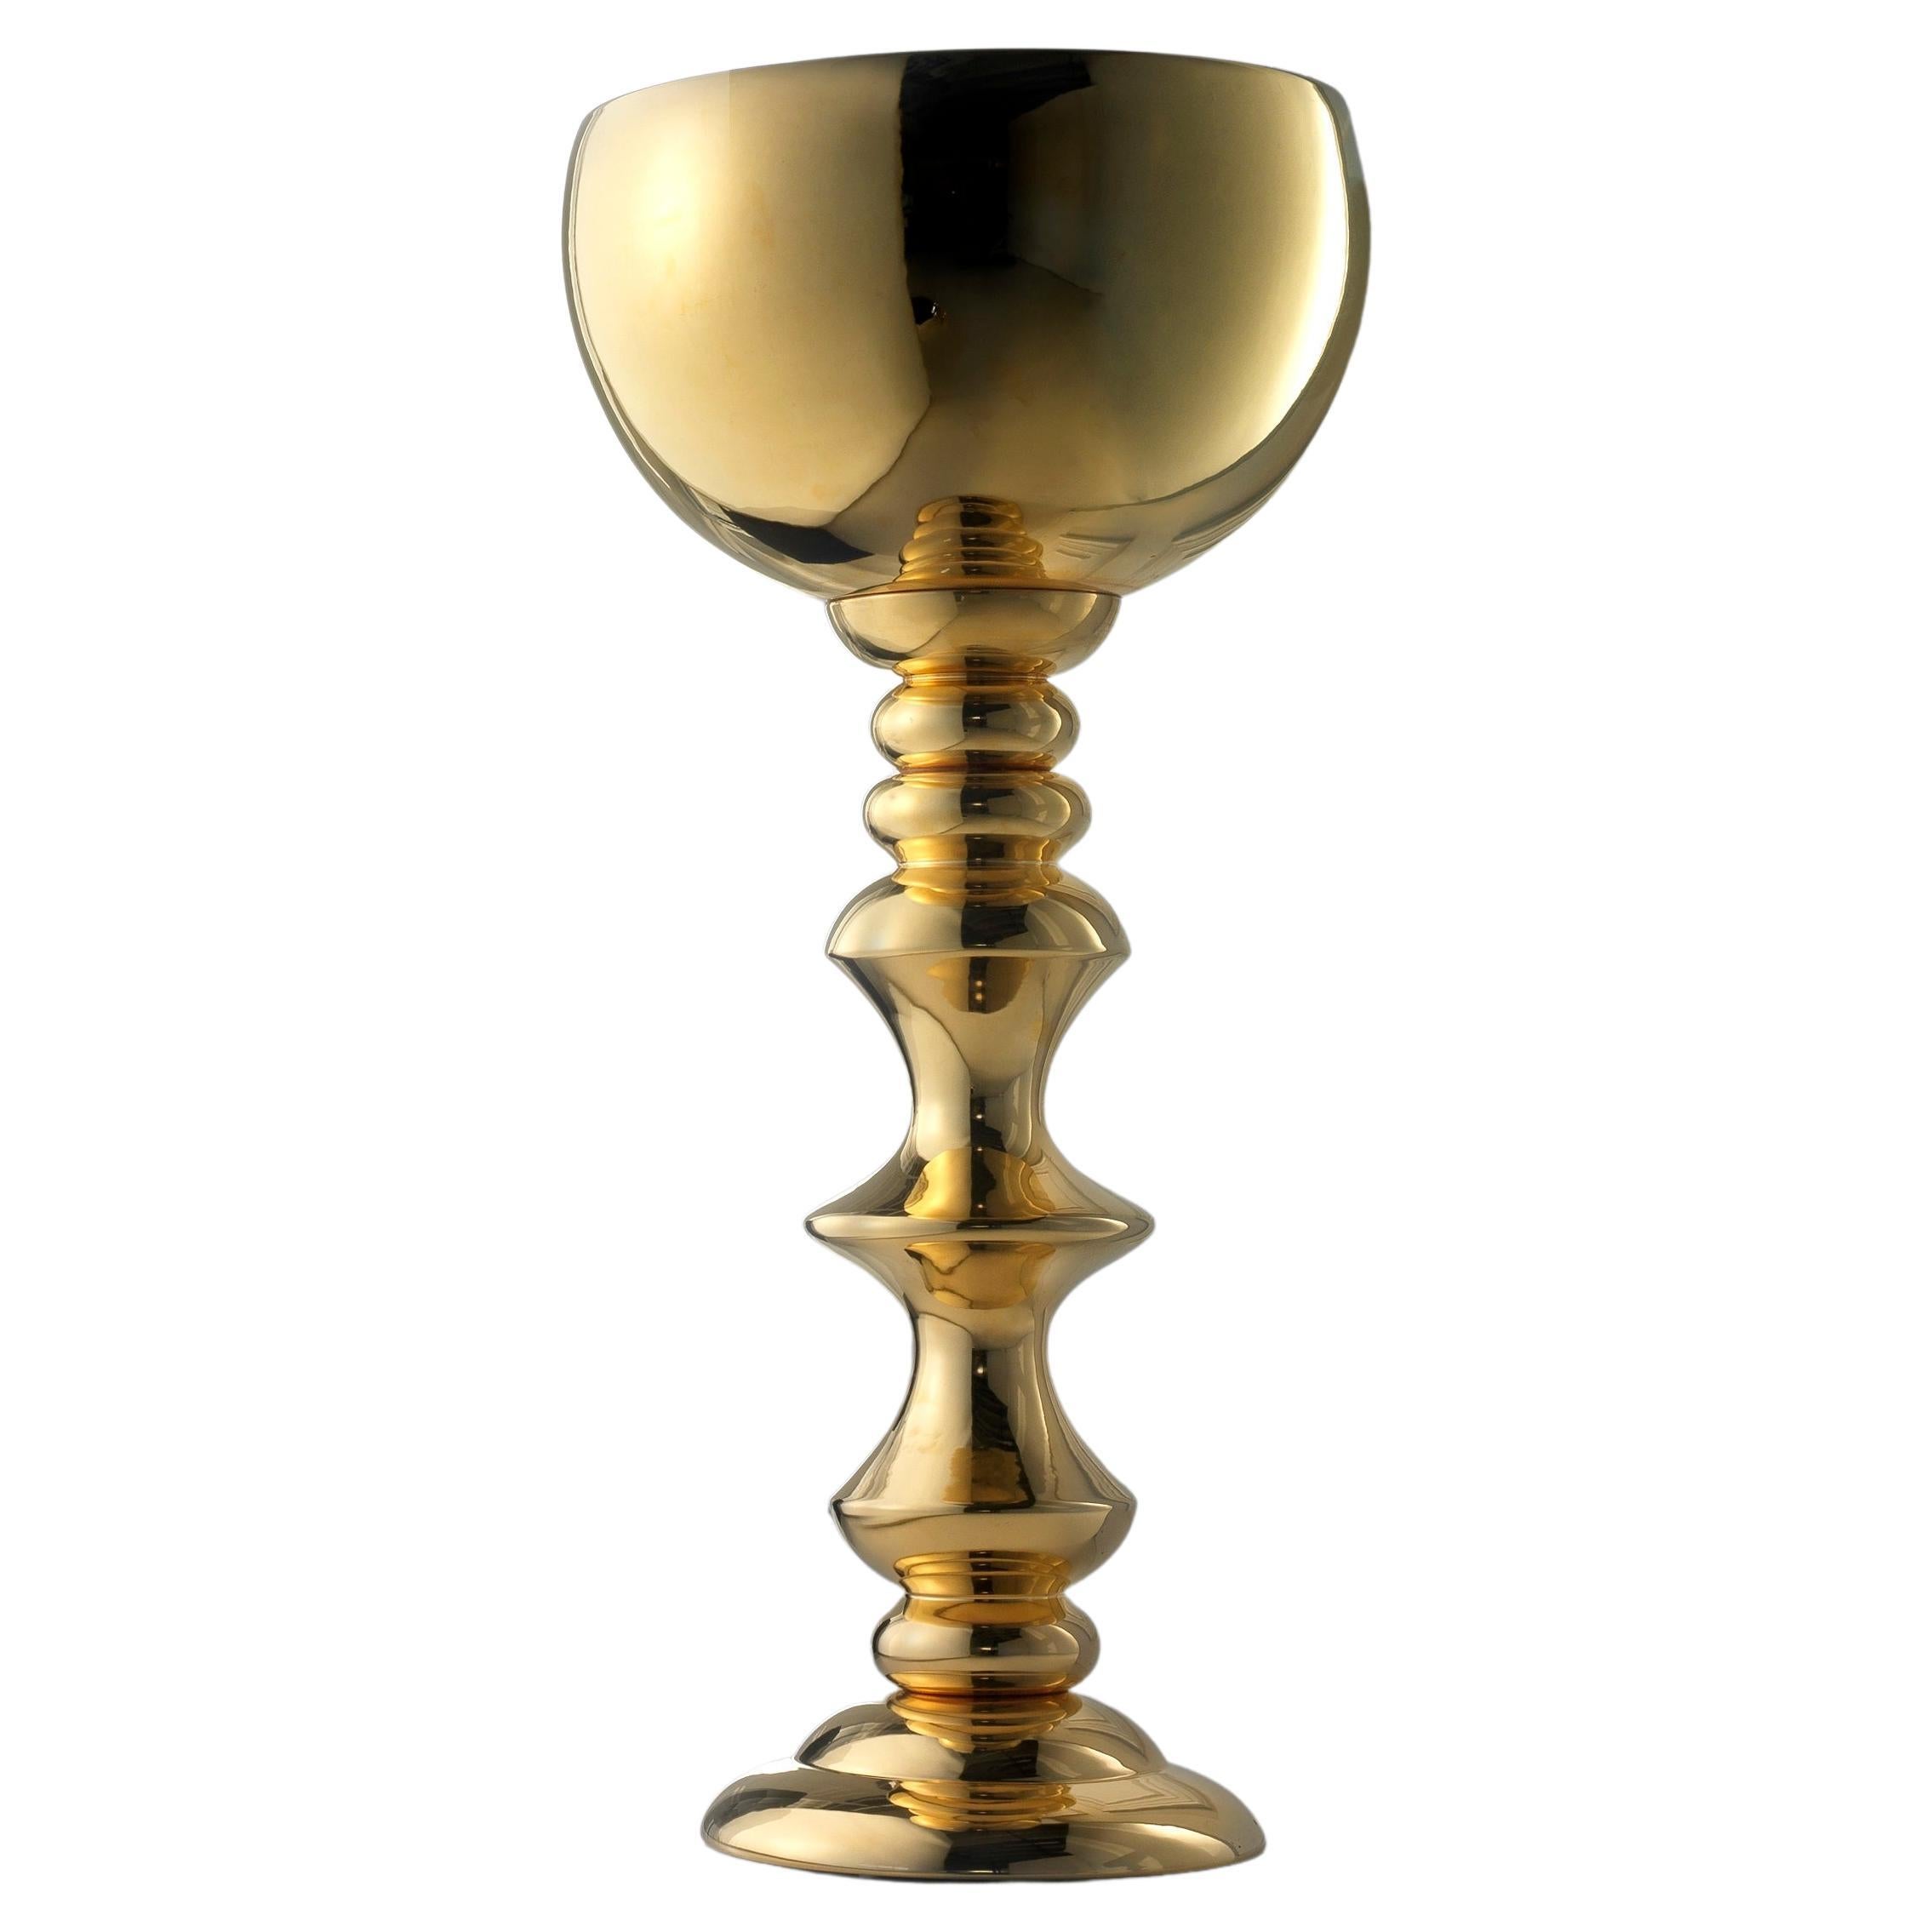 Ceramic Cup "Mida3" Handcrafted in 24kt Gold, by Gabriella B. Made in Italy For Sale